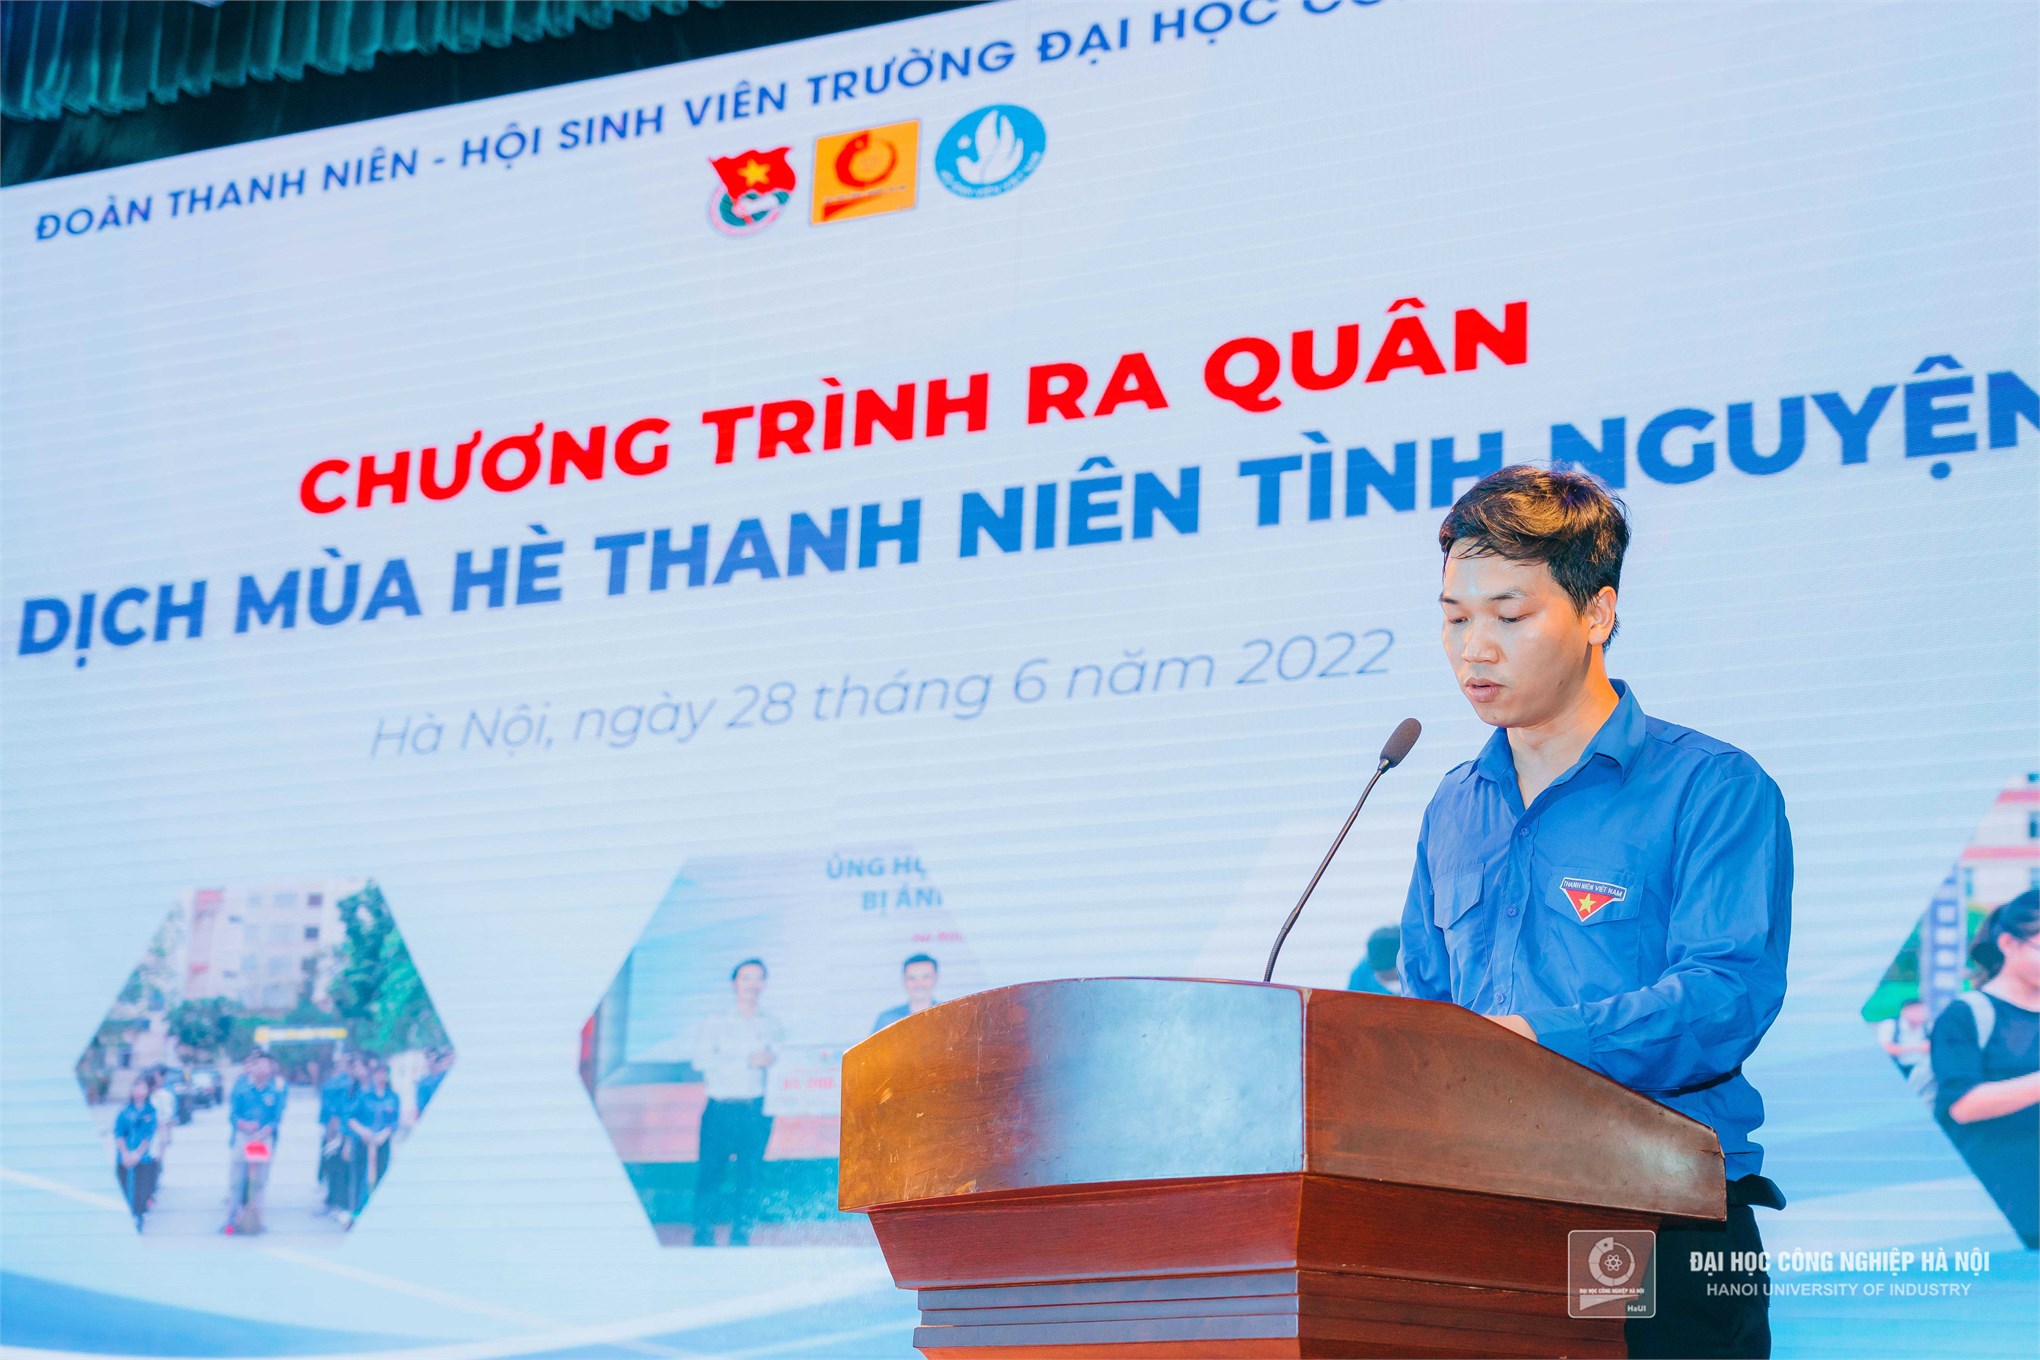 The Youth of Hanoi University of Industry launched the 2022 Summer Youth Volunteer Campaign